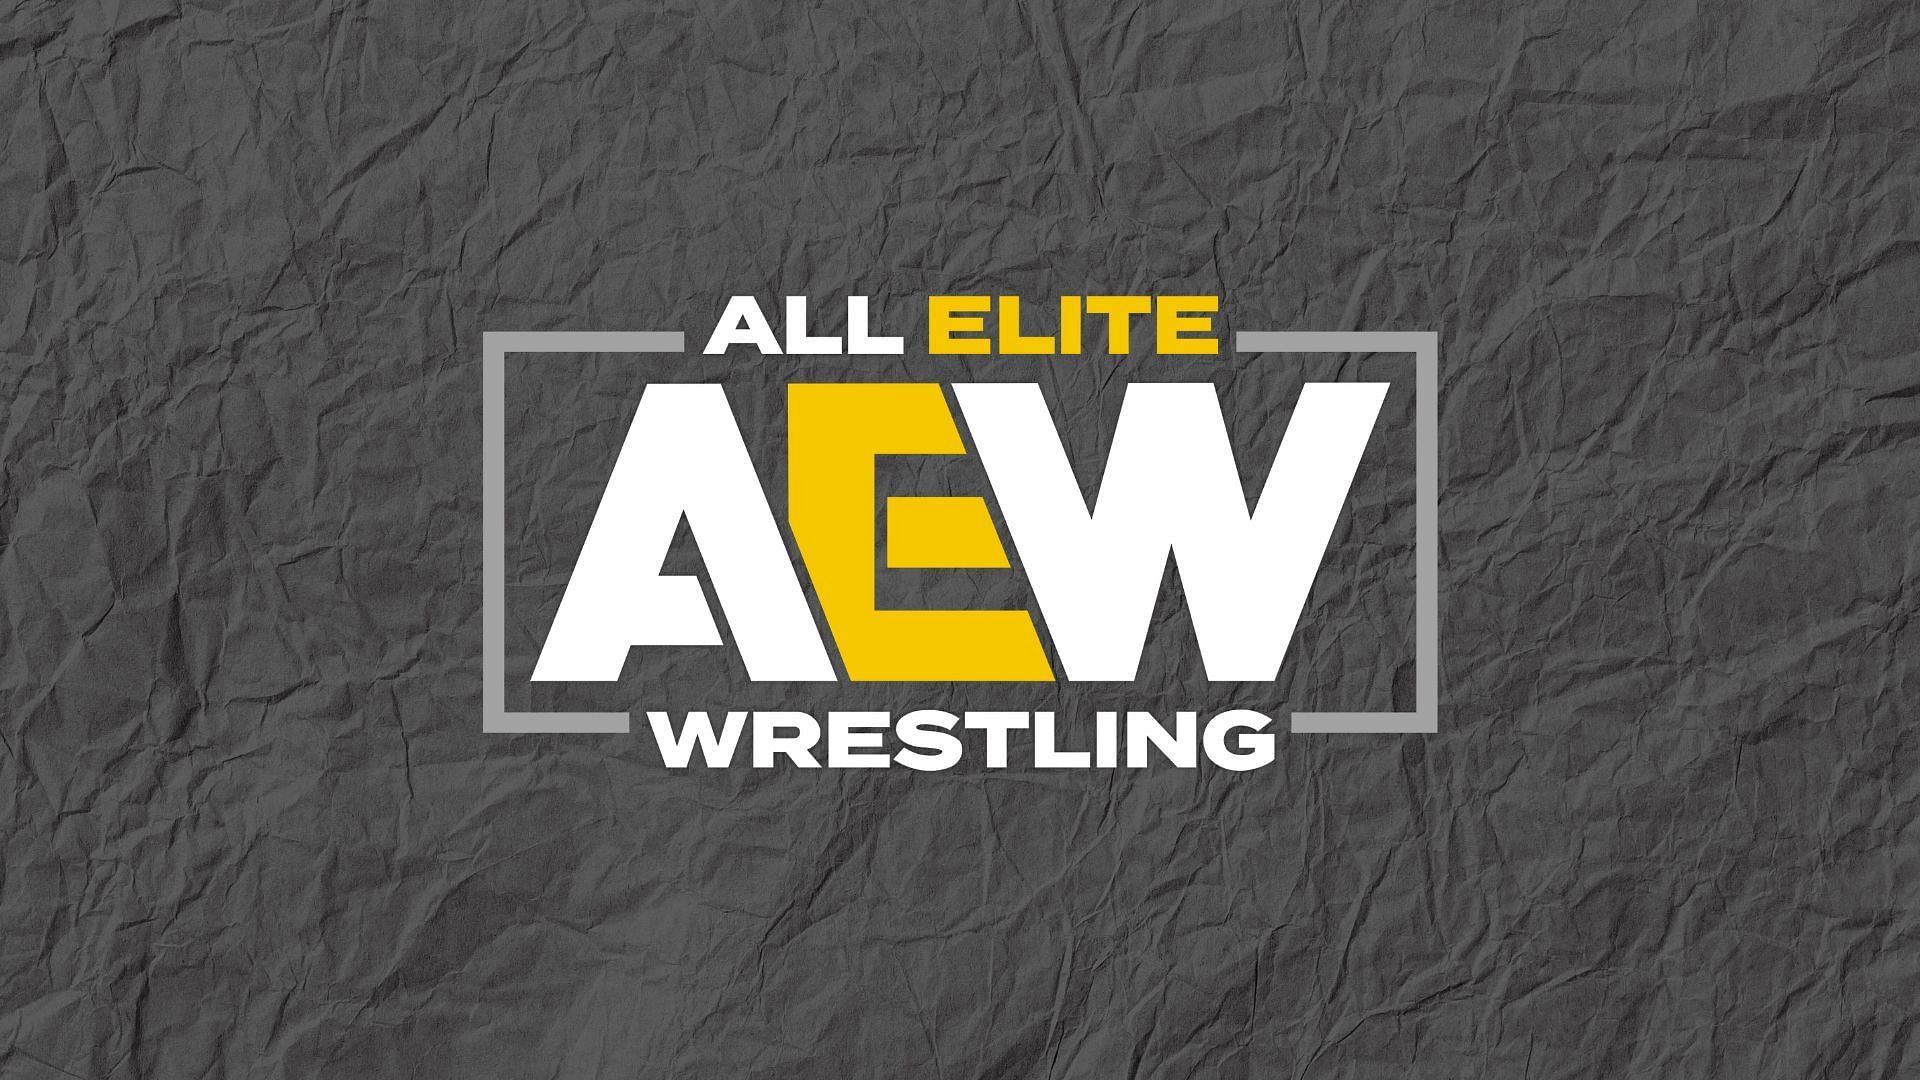 31-year old star says she got &quot;imposter syndrome&quot; after coming to AEW